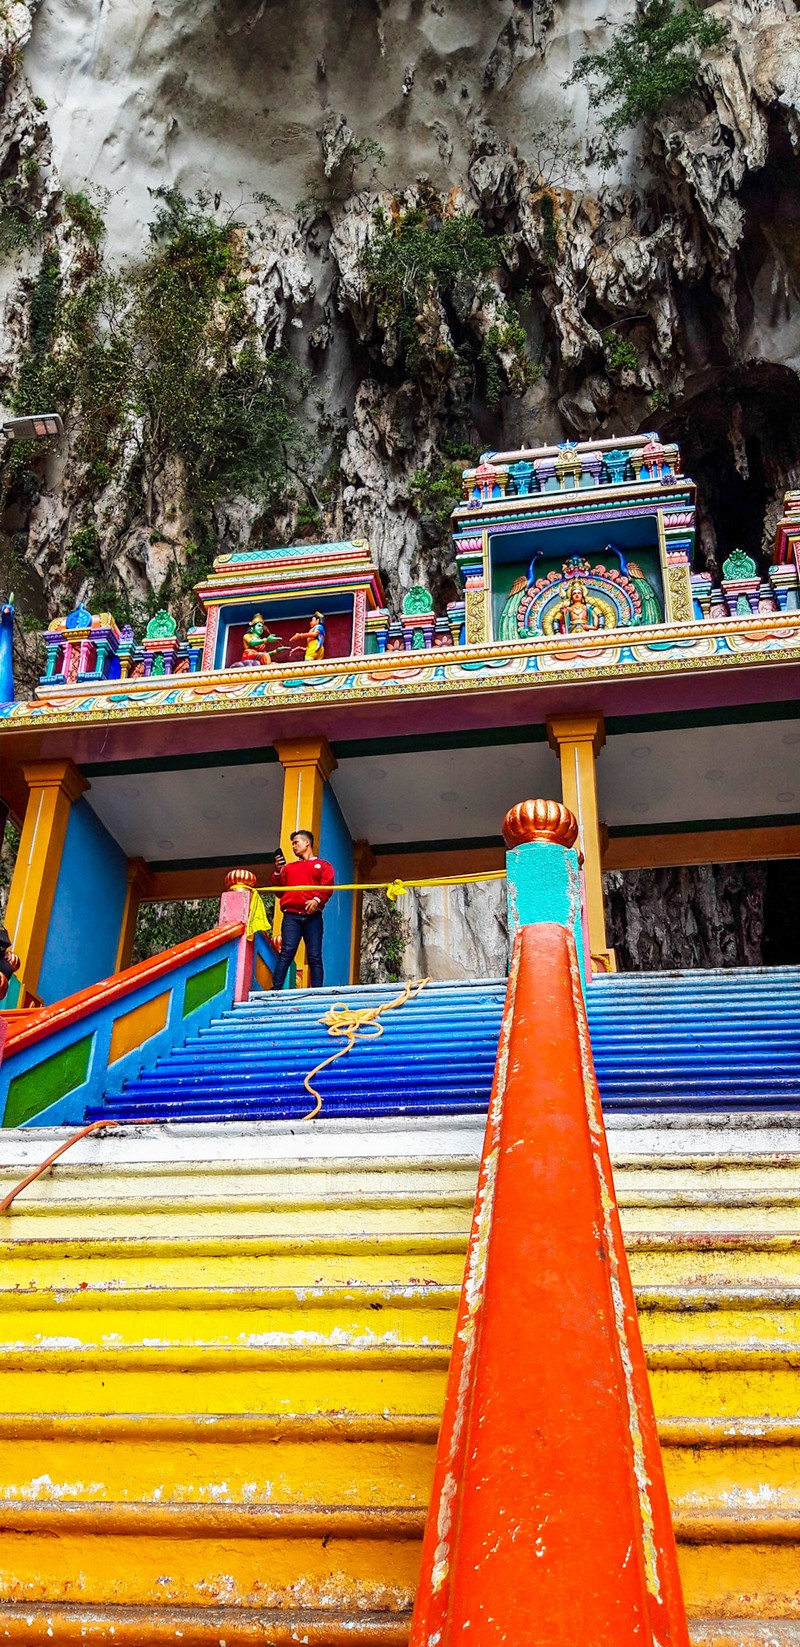 Batu Caves Malaysia are one of the biggest attractions in Kuala Lumpur, which are home to several Hindu temples. This place is totally worth a visit.